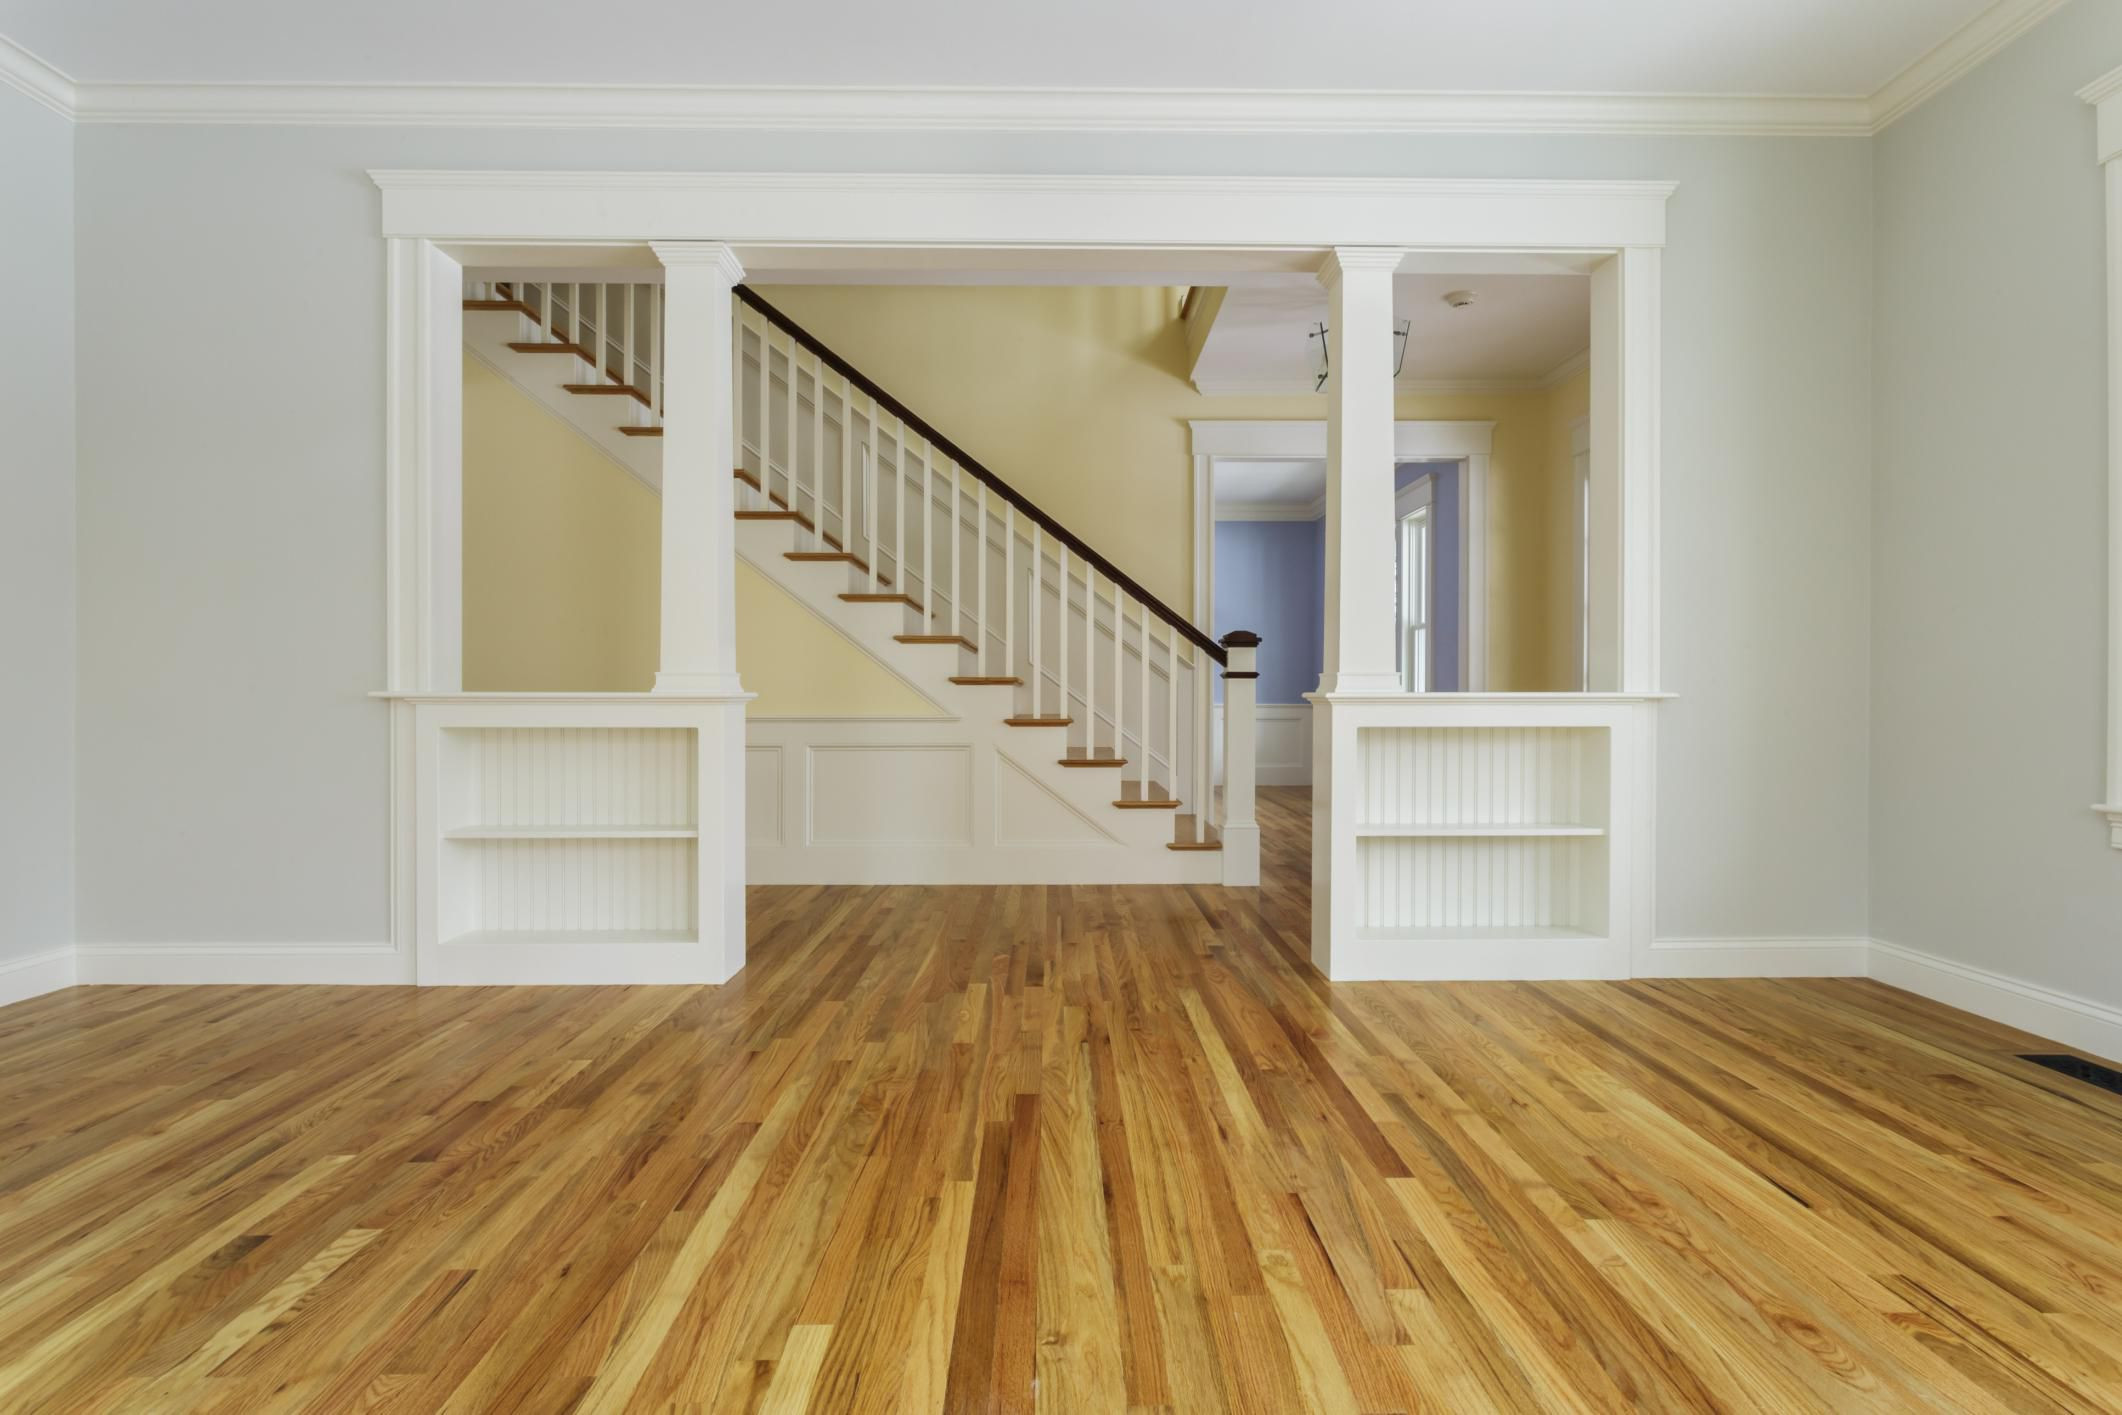 17 Spectacular Hardwood Floor Specialist Near Me 2022 free download hardwood floor specialist near me of guide to solid hardwood floors in 168686571 56a49f213df78cf772834e24